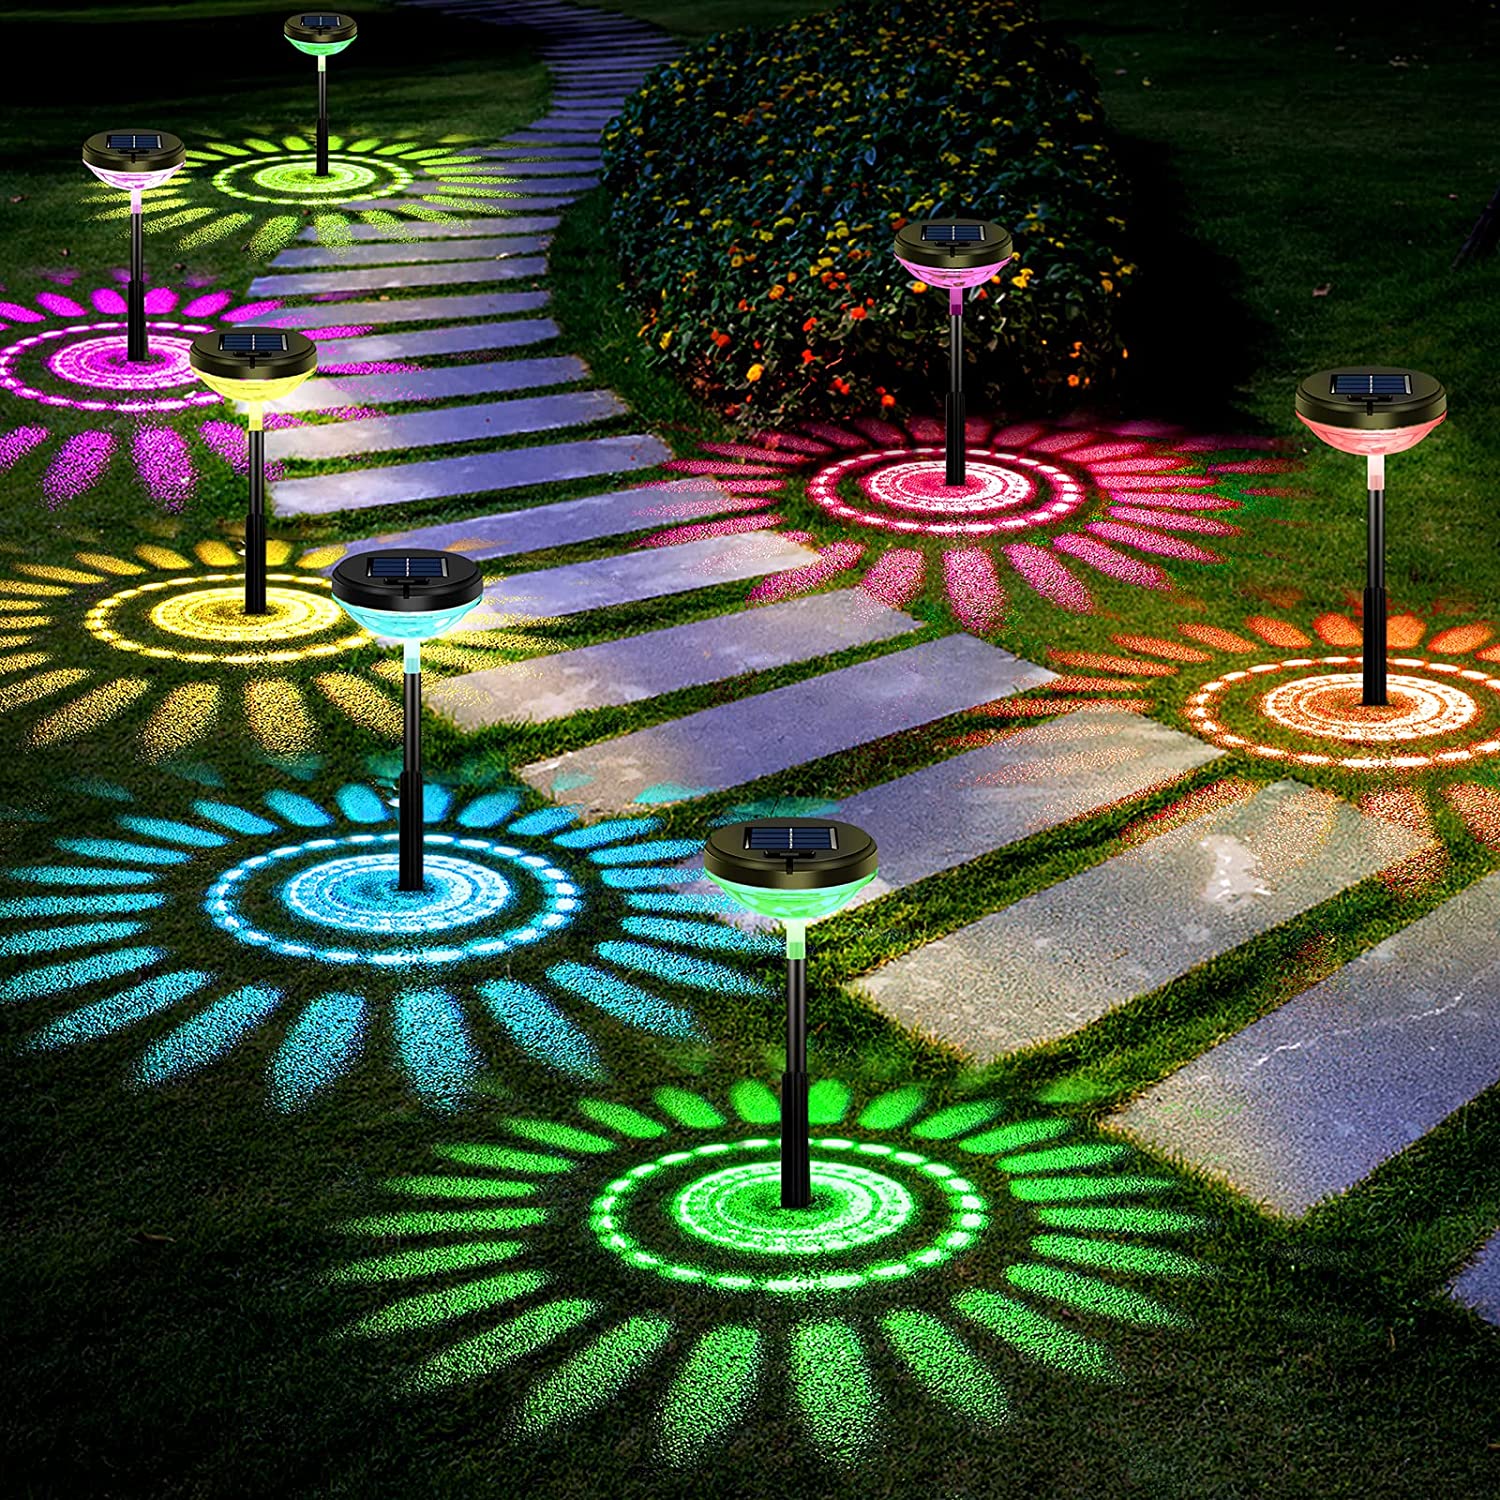 Bright Solar Pathway Lights – Color Changing (8pcs)